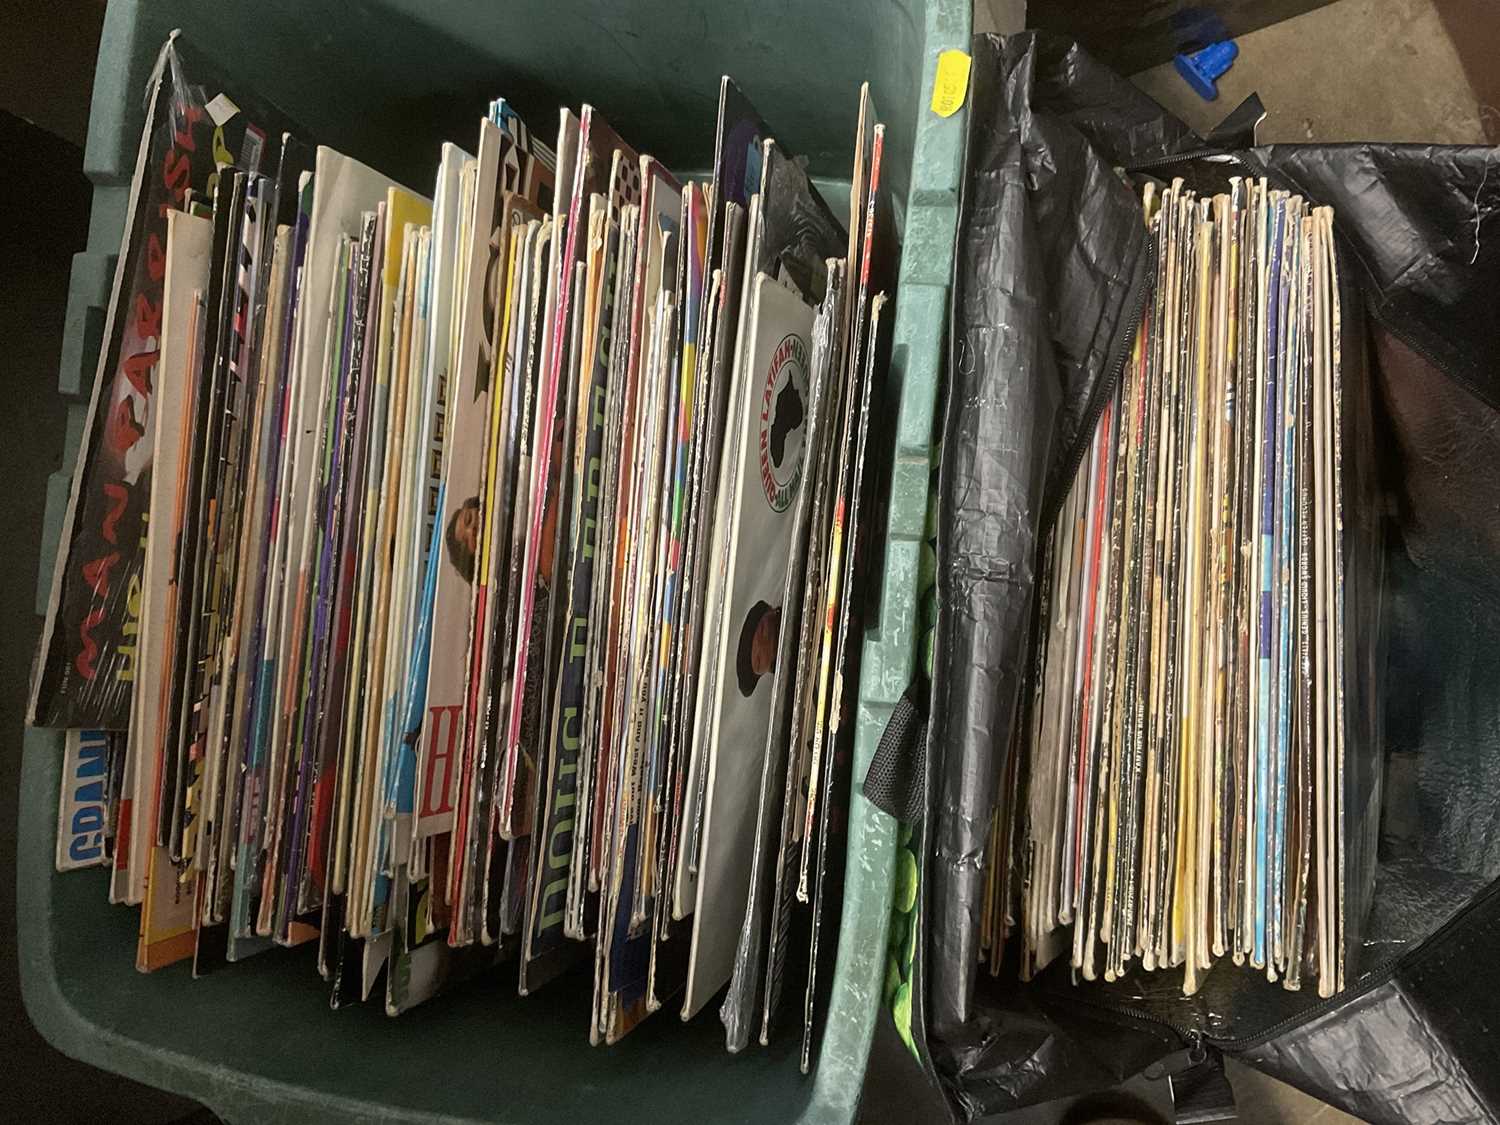 Lot 188 - One crate and one bag of vinyl, mainly 12 inch including Public Enemy, Man Parrish, Lakin Slabazz, 2 Live Crew, Heavy D and the Boyz, 3 Wise Men, N.W.A. and Hip Hop Compilations. Approximately 120...